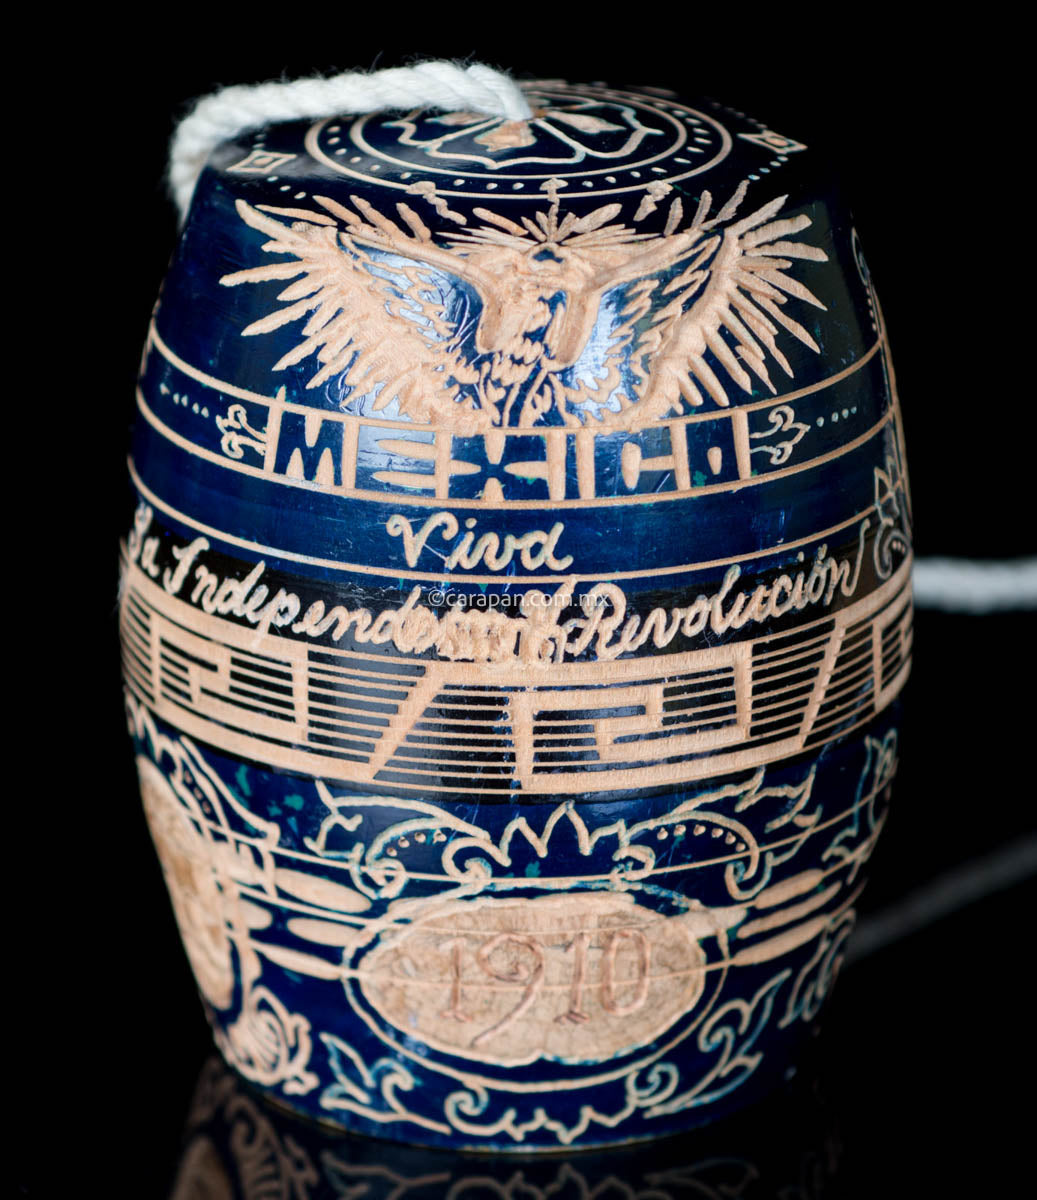 Traditional Mexican Toy Balero with Mexico's emblem on top & legend celebrating Mexico's independence and revolution.